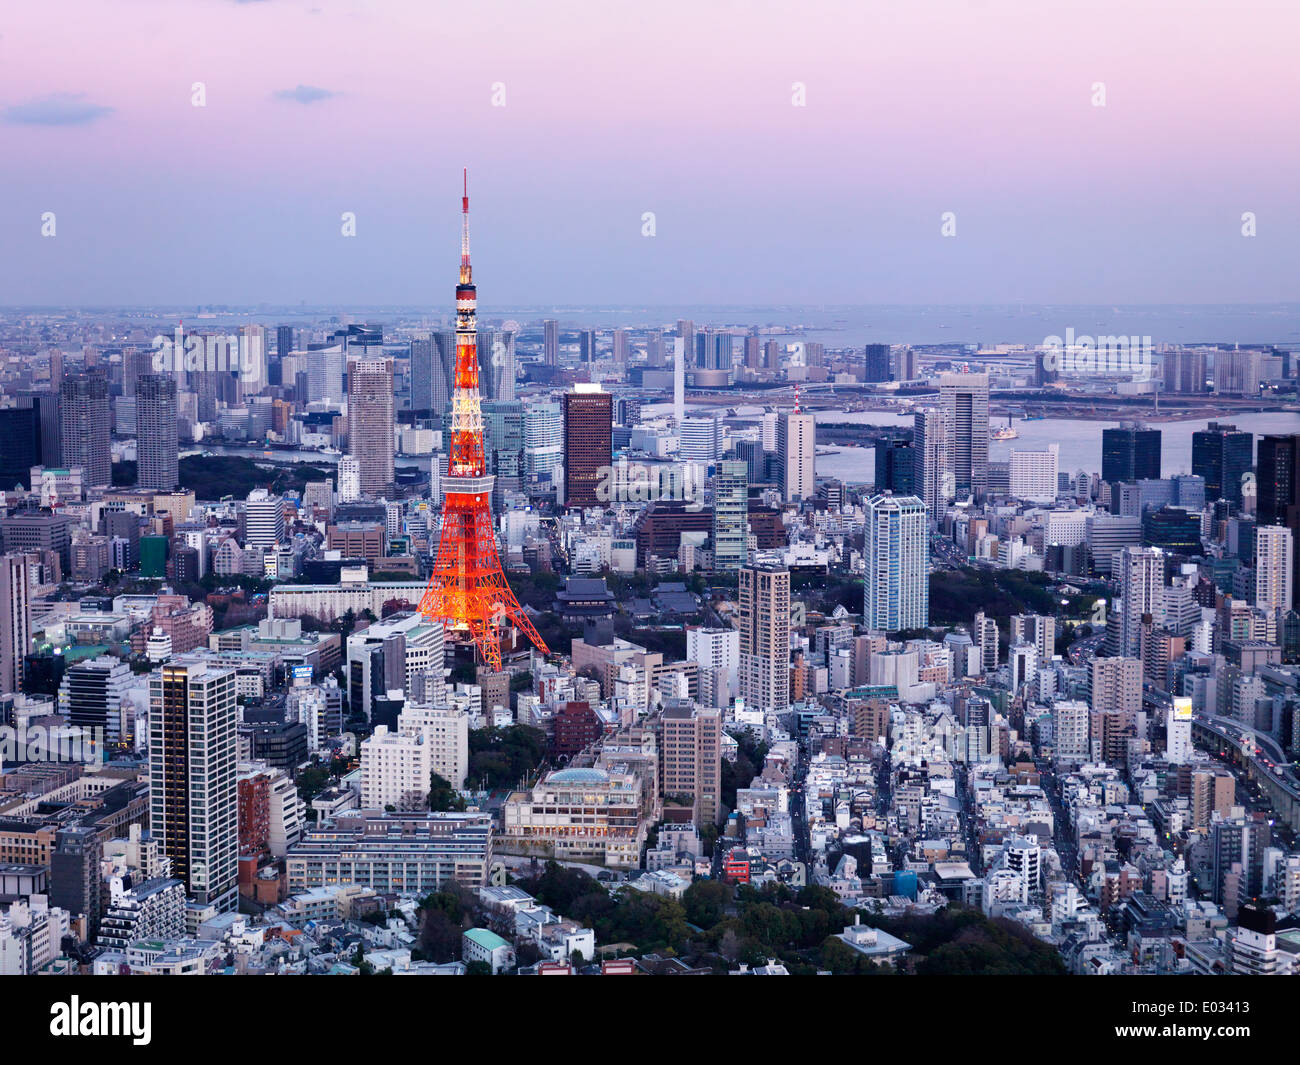 License available at MaximImages.com - Bright red Tokyo Tower in city landscape aerial view, artistic twilight photo. Tokyo, Japan. Stock Photo